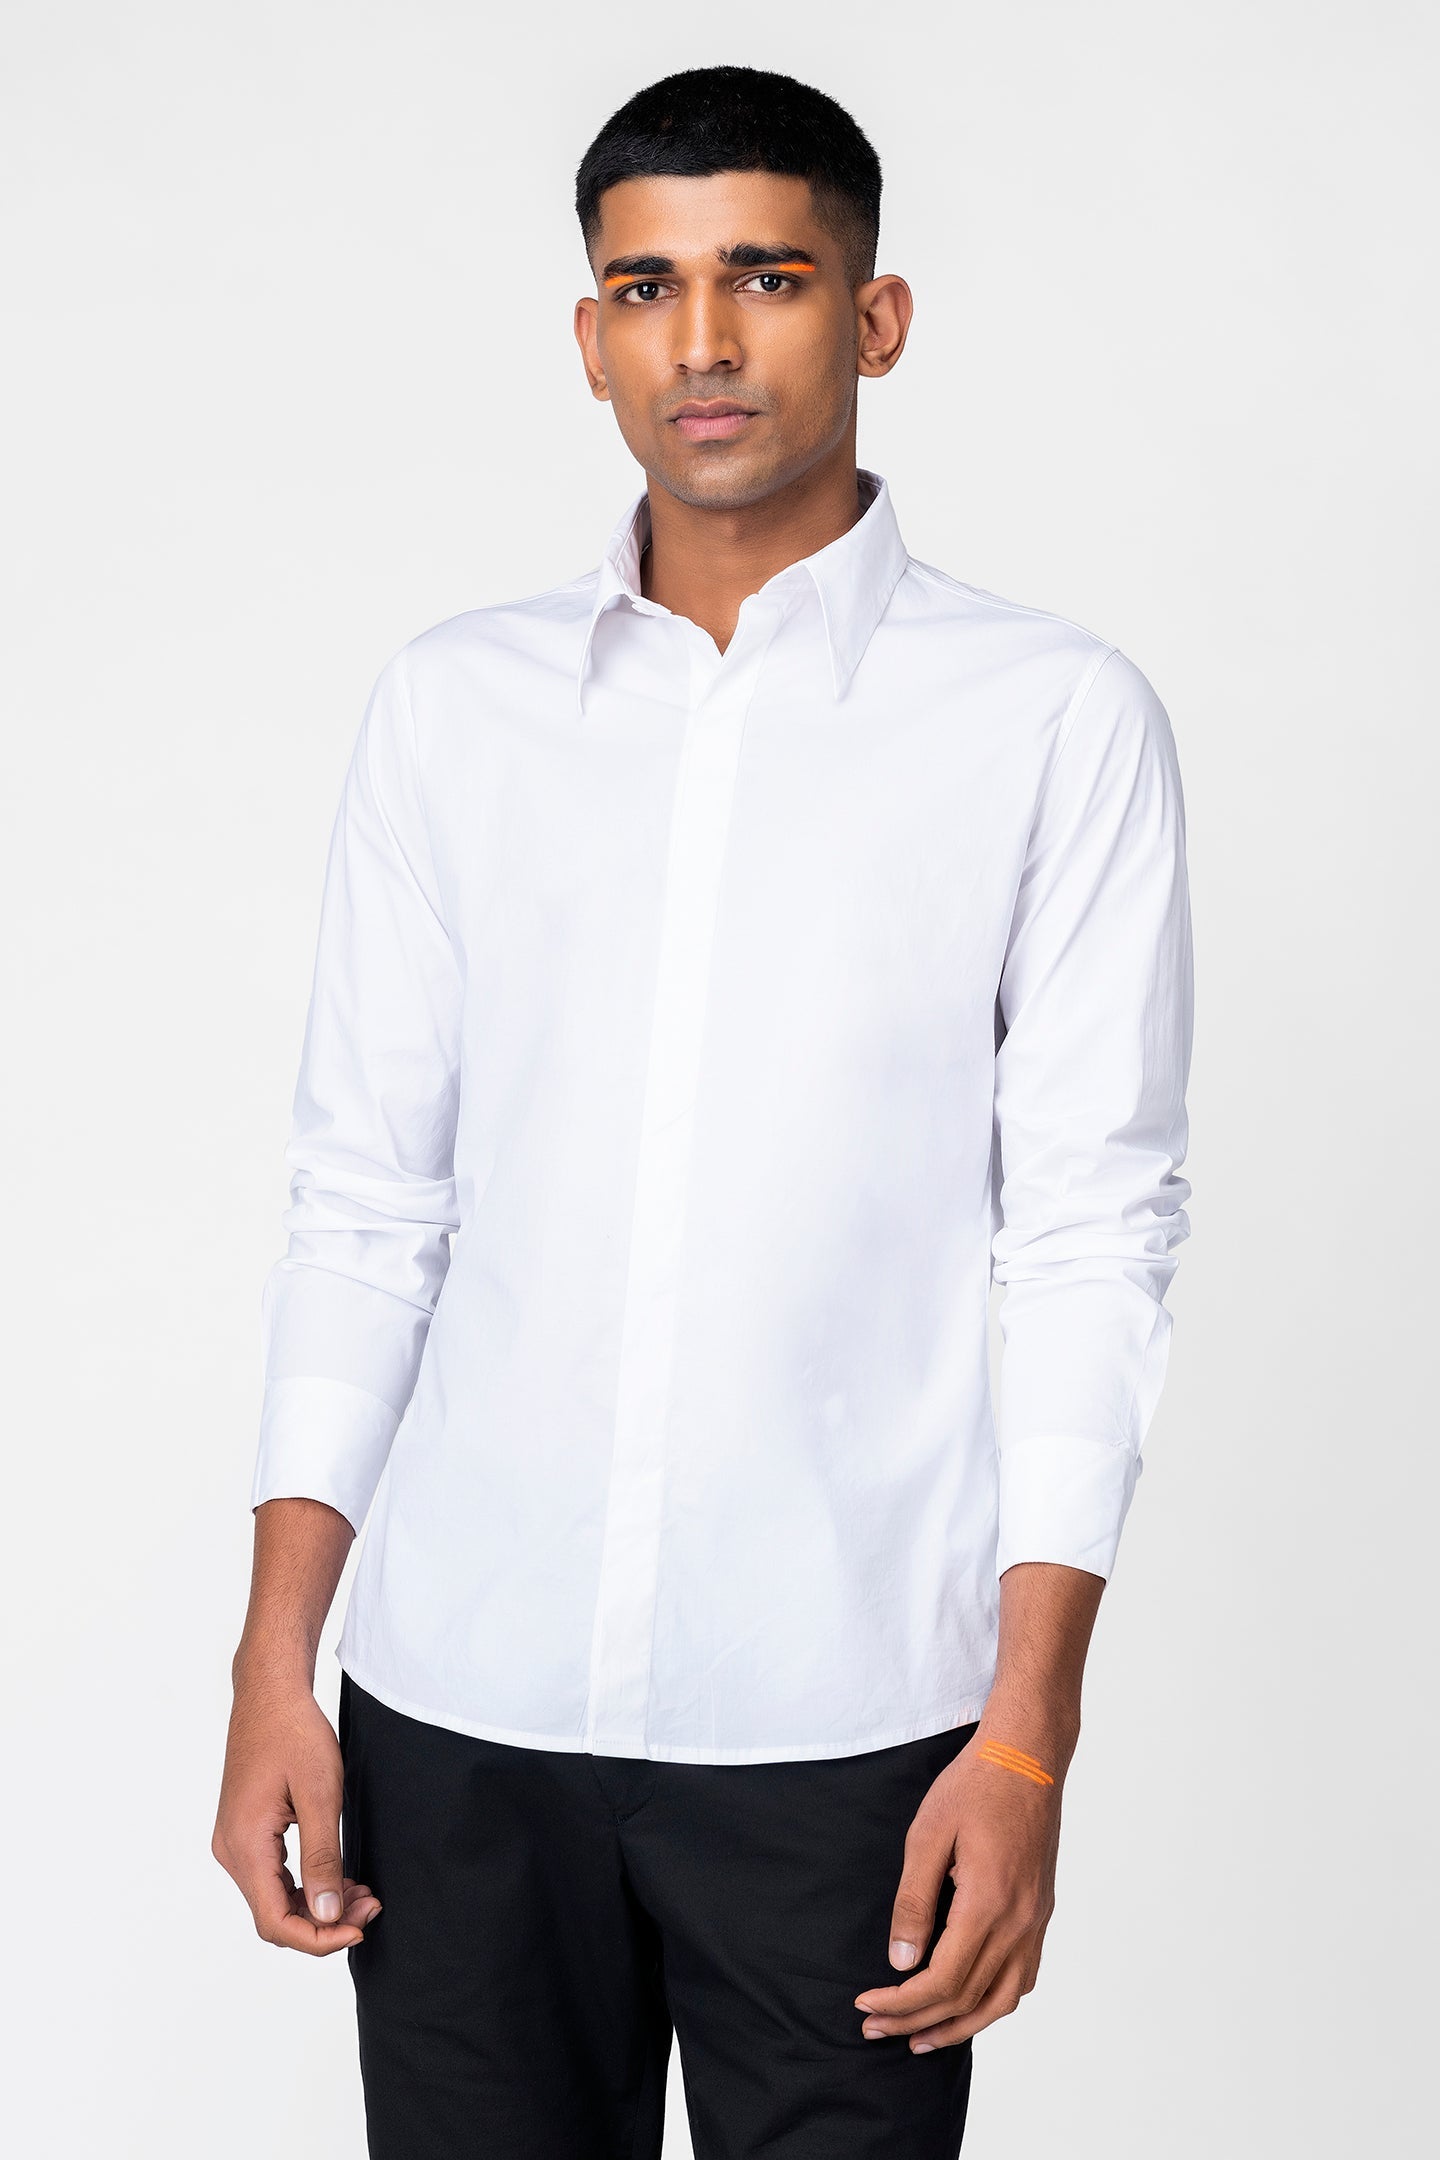 shirt-with-concealed-placket - Genes online store 2020